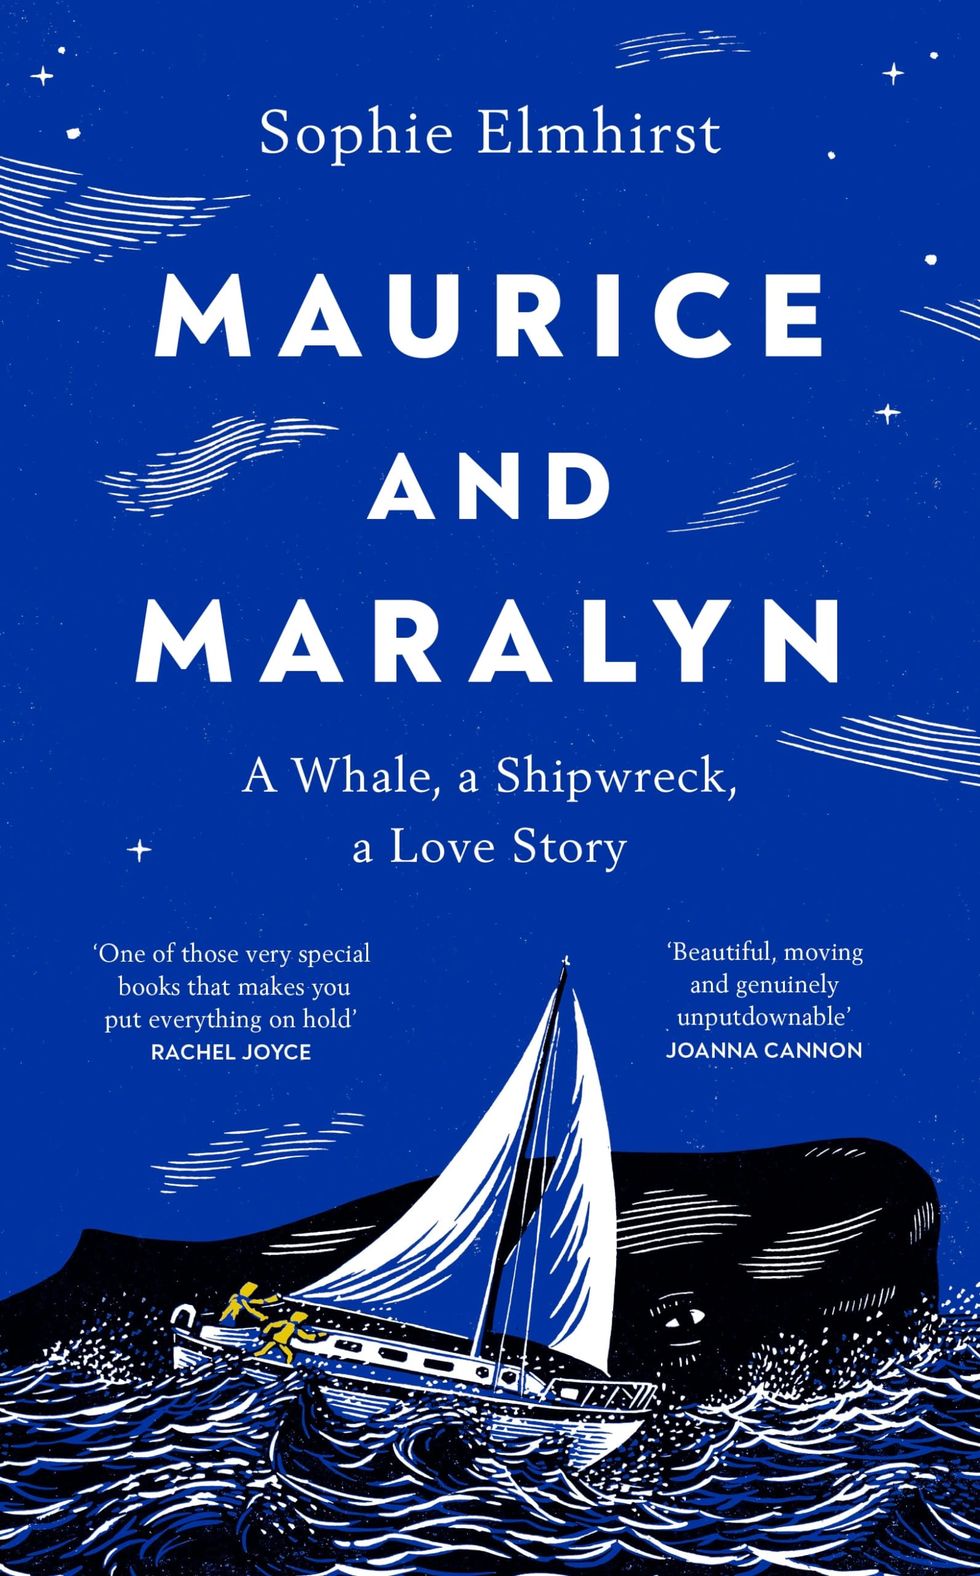 Maurice and Maralyn by Sophie Elmhirst